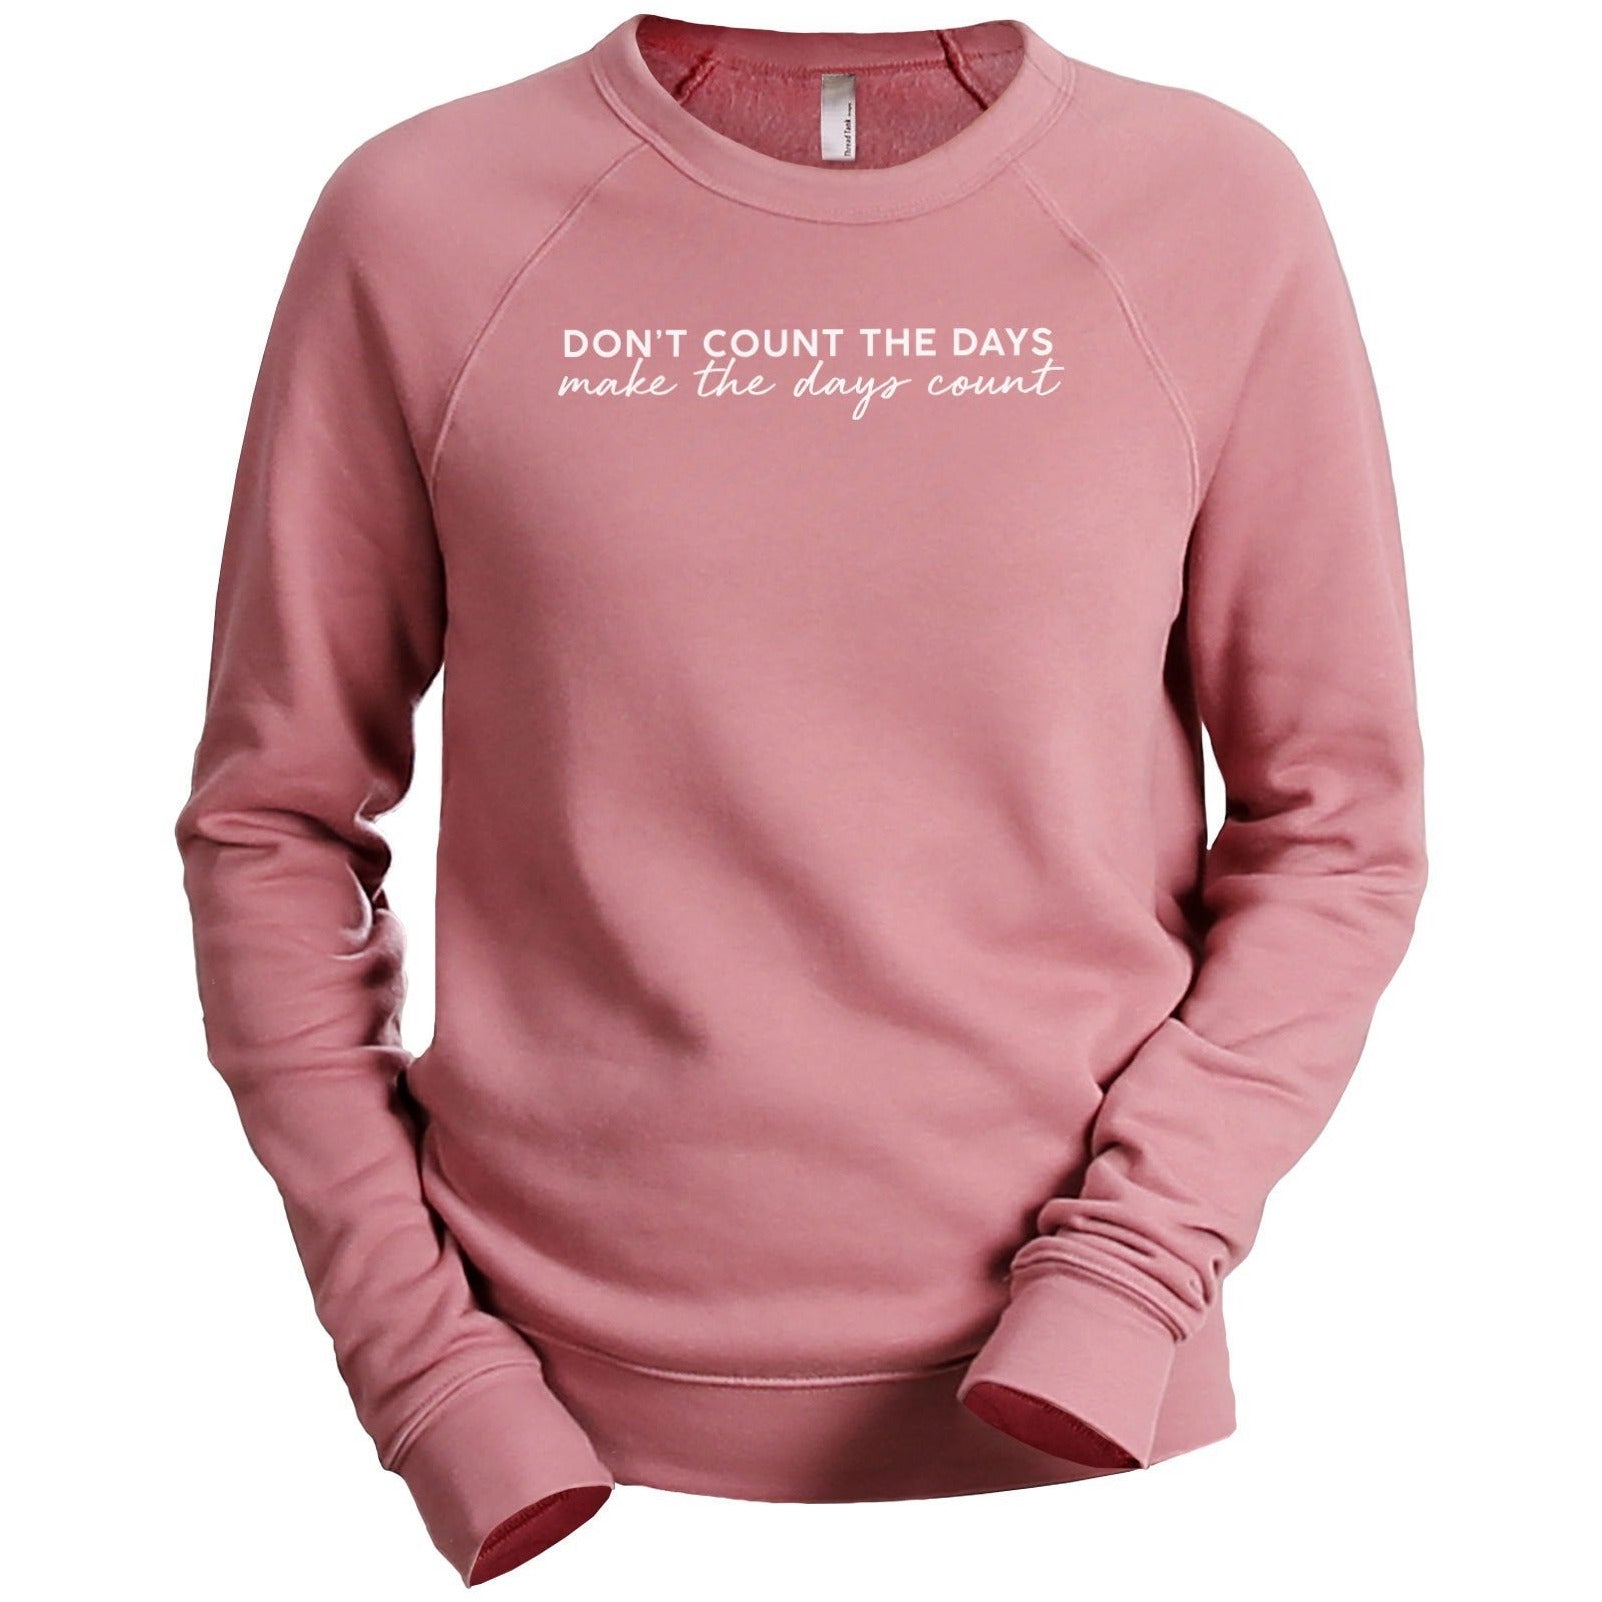 Don't Count The Days Make The Days Count Women's Cozy Fleece Longsleeves Sweater Rouge Closeup Details